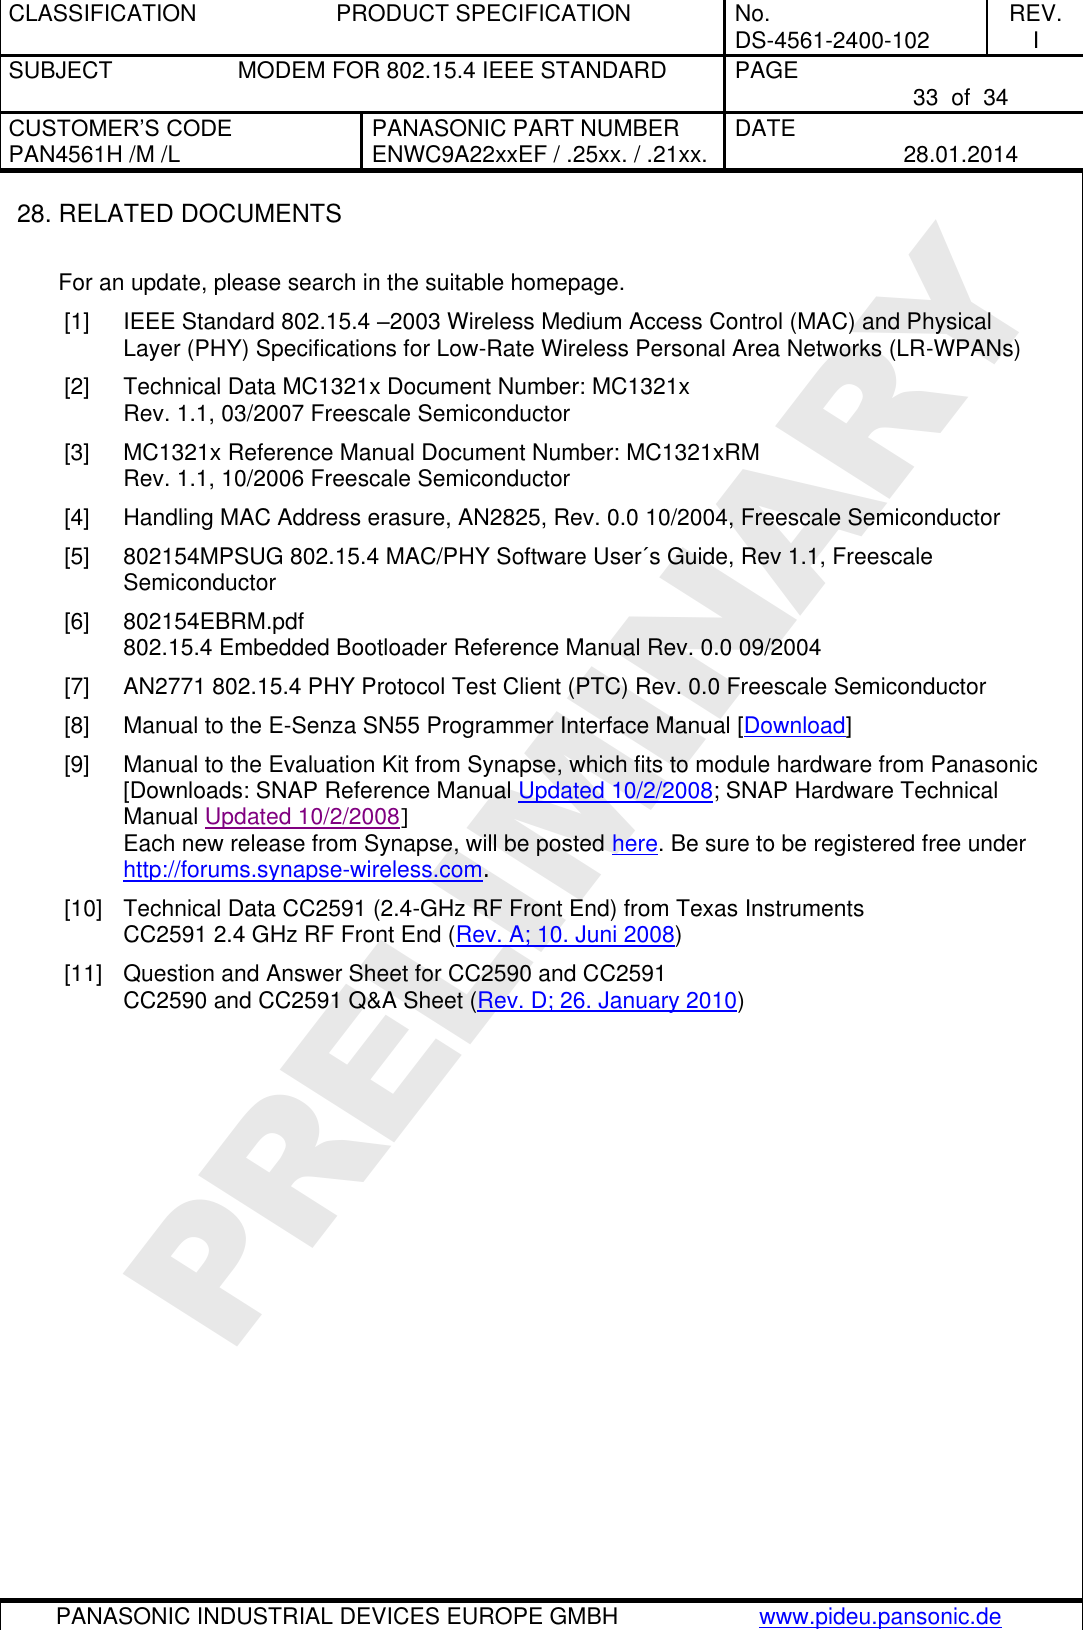 CLASSIFICATION  PRODUCT SPECIFICATION  No. DS-4561-2400-102 REV. I SUBJECT  MODEM FOR 802.15.4 IEEE STANDARD  PAGE   33  of  34 CUSTOMER’S CODE PAN4561H /M /L PANASONIC PART NUMBER ENWC9A22xxEF / .25xx. / .21xx. DATE   28.01.2014   PANASONIC INDUSTRIAL DEVICES EUROPE GMBH www.pideu.pansonic.de  PRELIMINARY 28. RELATED DOCUMENTS  For an update, please search in the suitable homepage. [1]  IEEE Standard 802.15.4 –2003 Wireless Medium Access Control (MAC) and Physical Layer (PHY) Specifications for Low-Rate Wireless Personal Area Networks (LR-WPANs) [2]  Technical Data MC1321x Document Number: MC1321x  Rev. 1.1, 03/2007 Freescale Semiconductor [3]  MC1321x Reference Manual Document Number: MC1321xRM Rev. 1.1, 10/2006 Freescale Semiconductor [4]  Handling MAC Address erasure, AN2825, Rev. 0.0 10/2004, Freescale Semiconductor [5]  802154MPSUG 802.15.4 MAC/PHY Software User´s Guide, Rev 1.1, Freescale Semiconductor [6]  802154EBRM.pdf 802.15.4 Embedded Bootloader Reference Manual Rev. 0.0 09/2004 [7]  AN2771 802.15.4 PHY Protocol Test Client (PTC) Rev. 0.0 Freescale Semiconductor [8]  Manual to the E-Senza SN55 Programmer Interface Manual [Download] [9]  Manual to the Evaluation Kit from Synapse, which fits to module hardware from Panasonic [Downloads: SNAP Reference Manual Updated 10/2/2008; SNAP Hardware Technical Manual Updated 10/2/2008] Each new release from Synapse, will be posted here. Be sure to be registered free under http://forums.synapse-wireless.com. [10]  Technical Data CC2591 (2.4-GHz RF Front End) from Texas Instruments CC2591 2.4 GHz RF Front End (Rev. A; 10. Juni 2008) [11]  Question and Answer Sheet for CC2590 and CC2591 CC2590 and CC2591 Q&amp;A Sheet (Rev. D; 26. January 2010) 